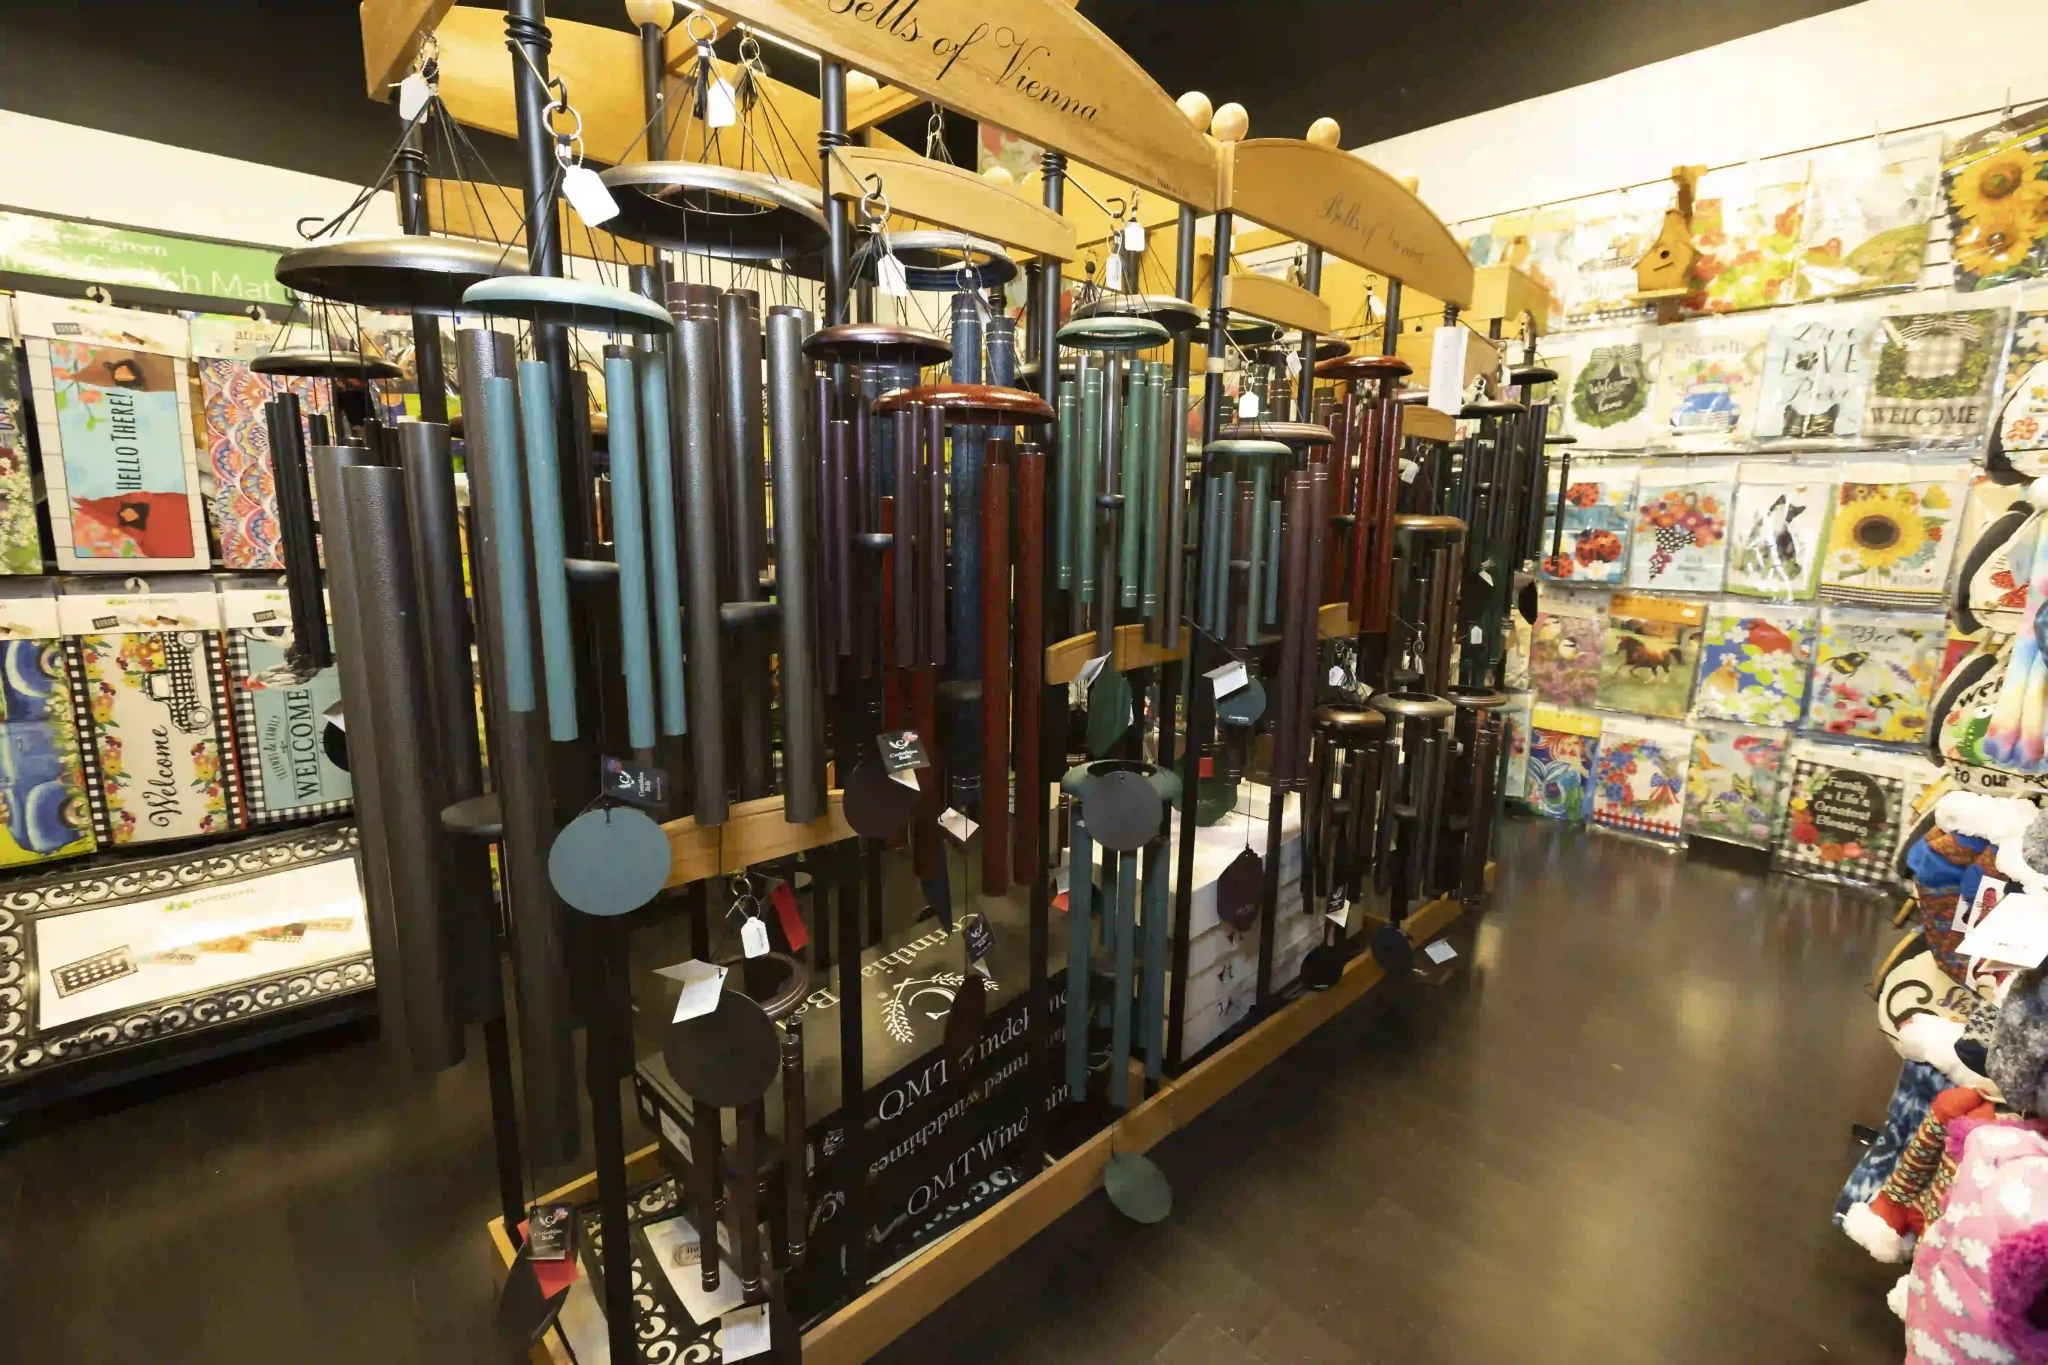 Wind chimes for sale at Dickens Gift Shop in Branson, Missouri